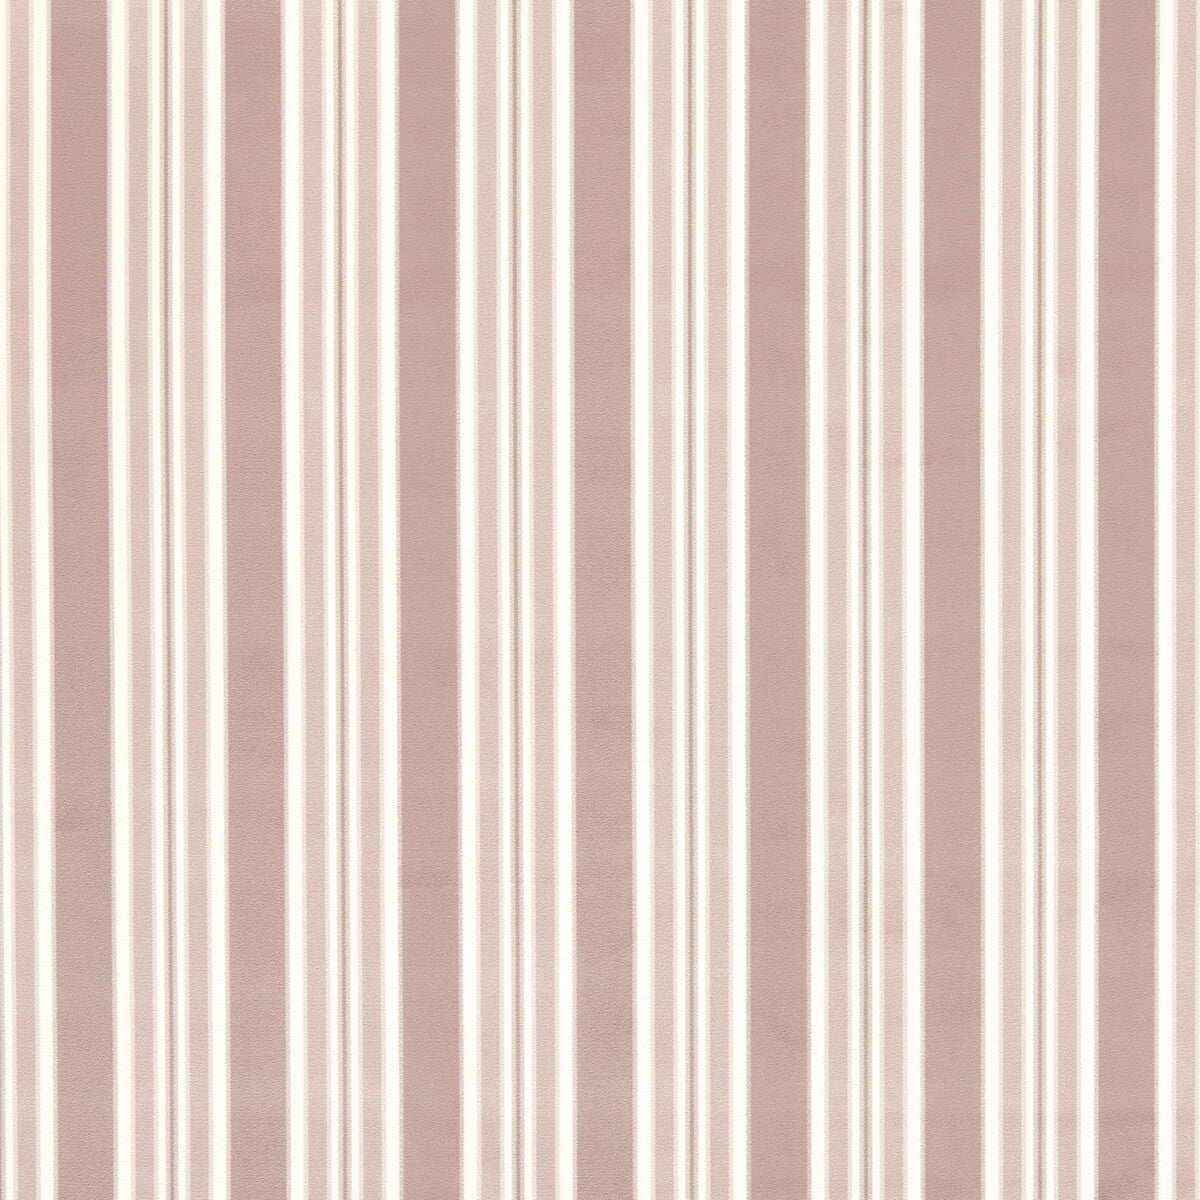 Wilmott fabric in blush color - pattern F1691/02.CAC.0 - by Clarke And Clarke in the Whitworth collection